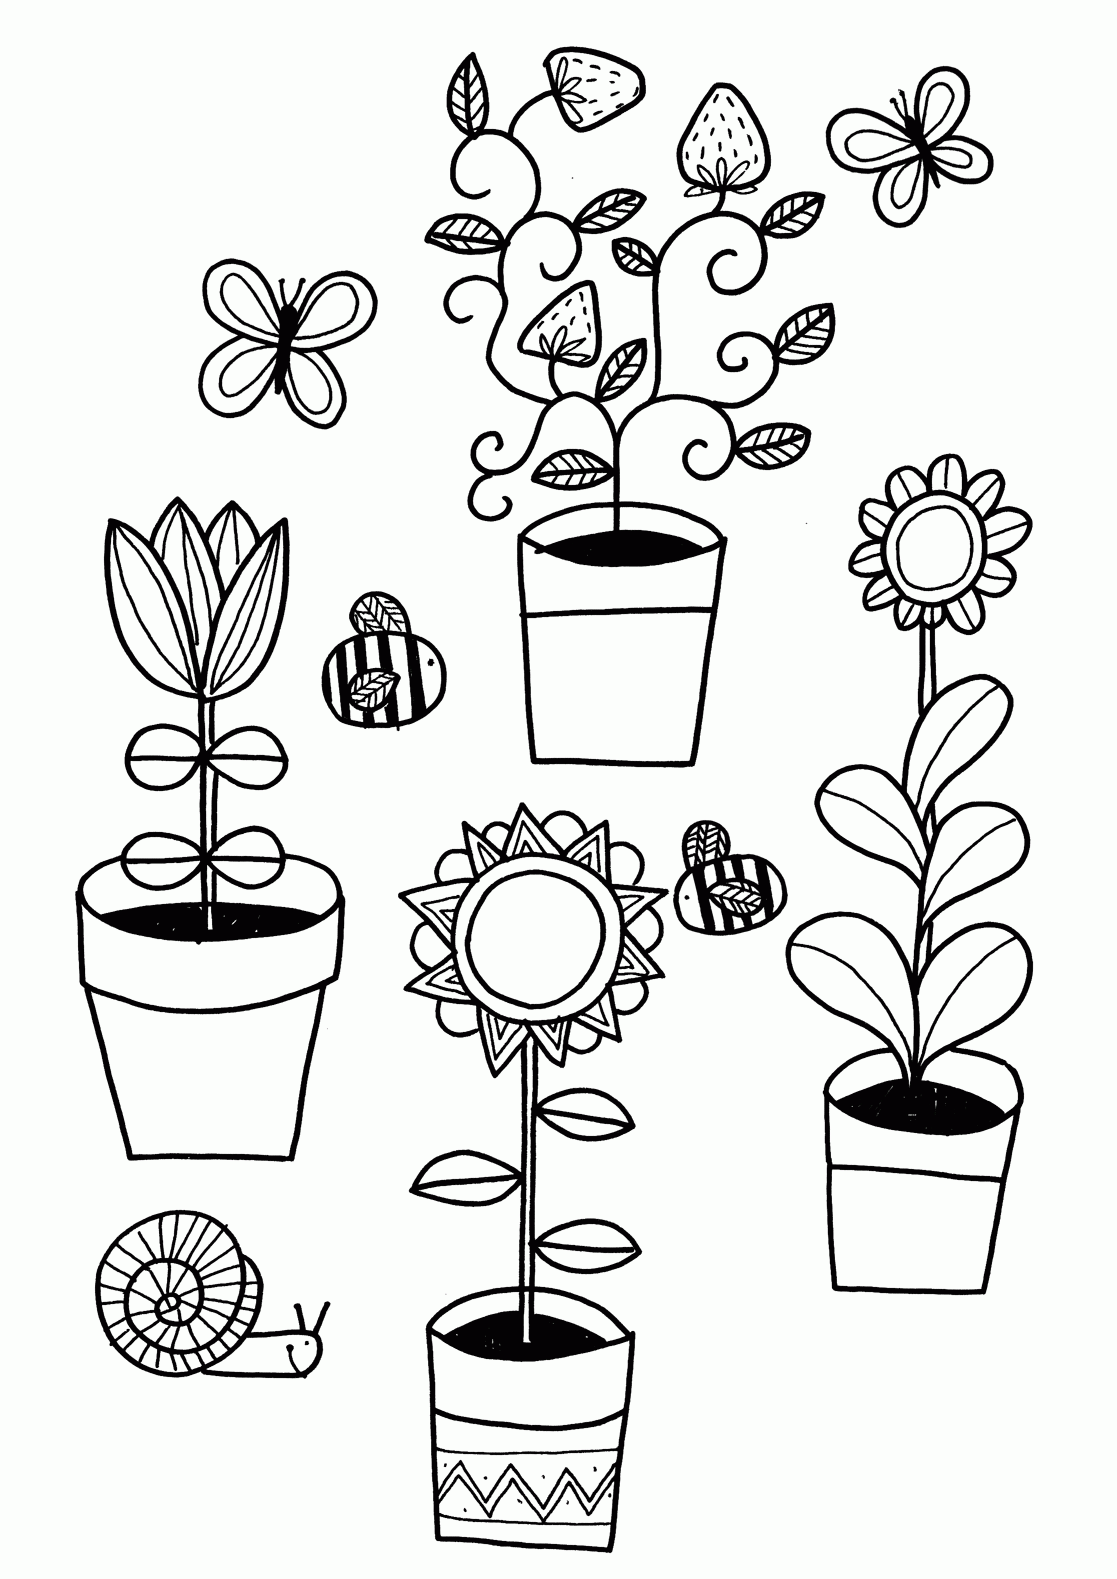 Free Planting Coloring Pages, Download Free Planting Coloring Pages png